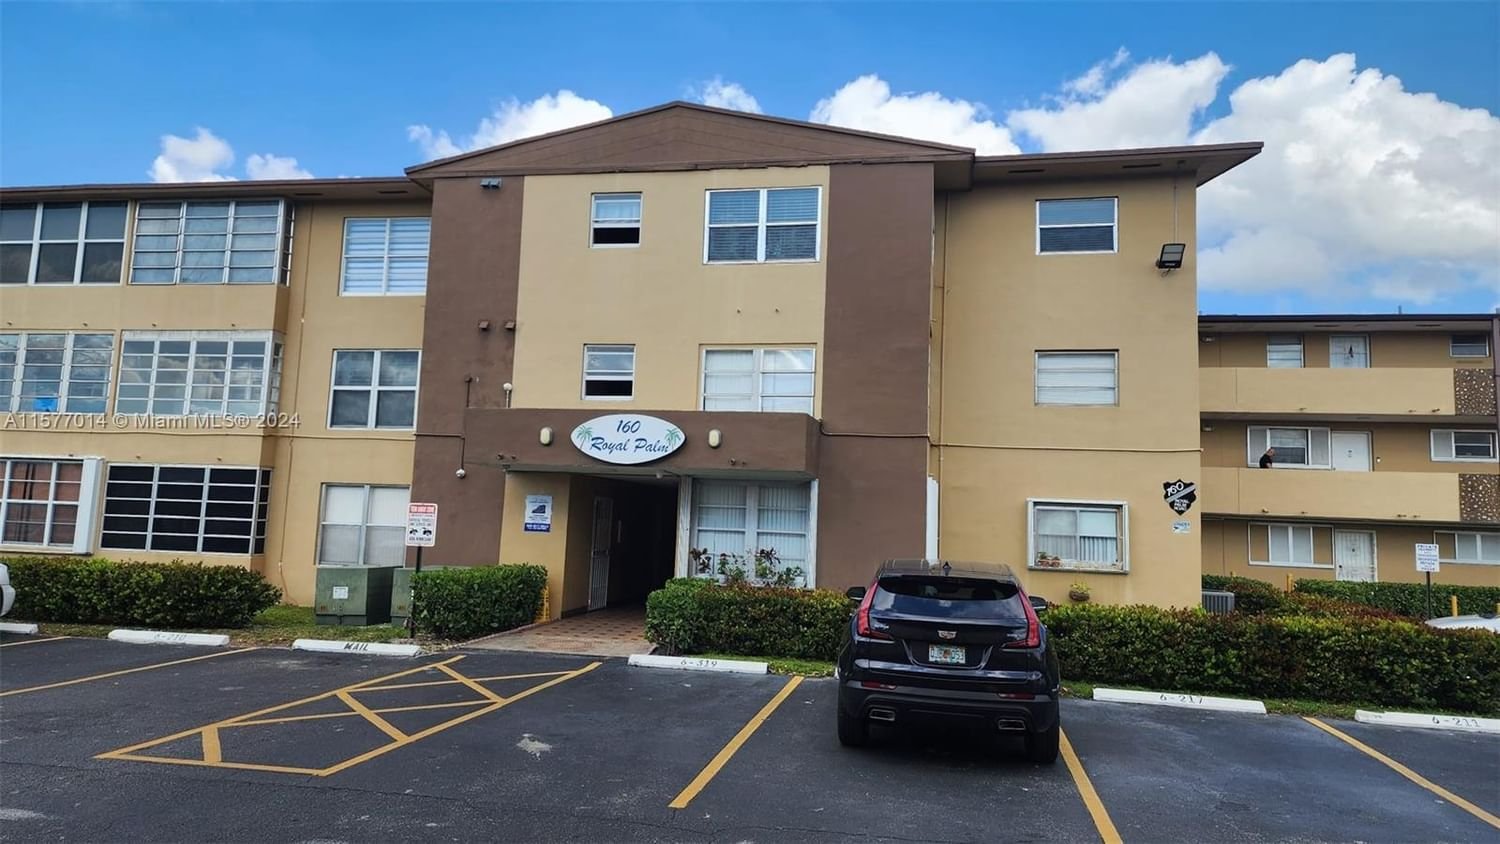 Real estate property located at 160 Royal Palm Rd #308, Miami-Dade County, PALM SPRINGS GARDENS BLDG, Hialeah Gardens, FL